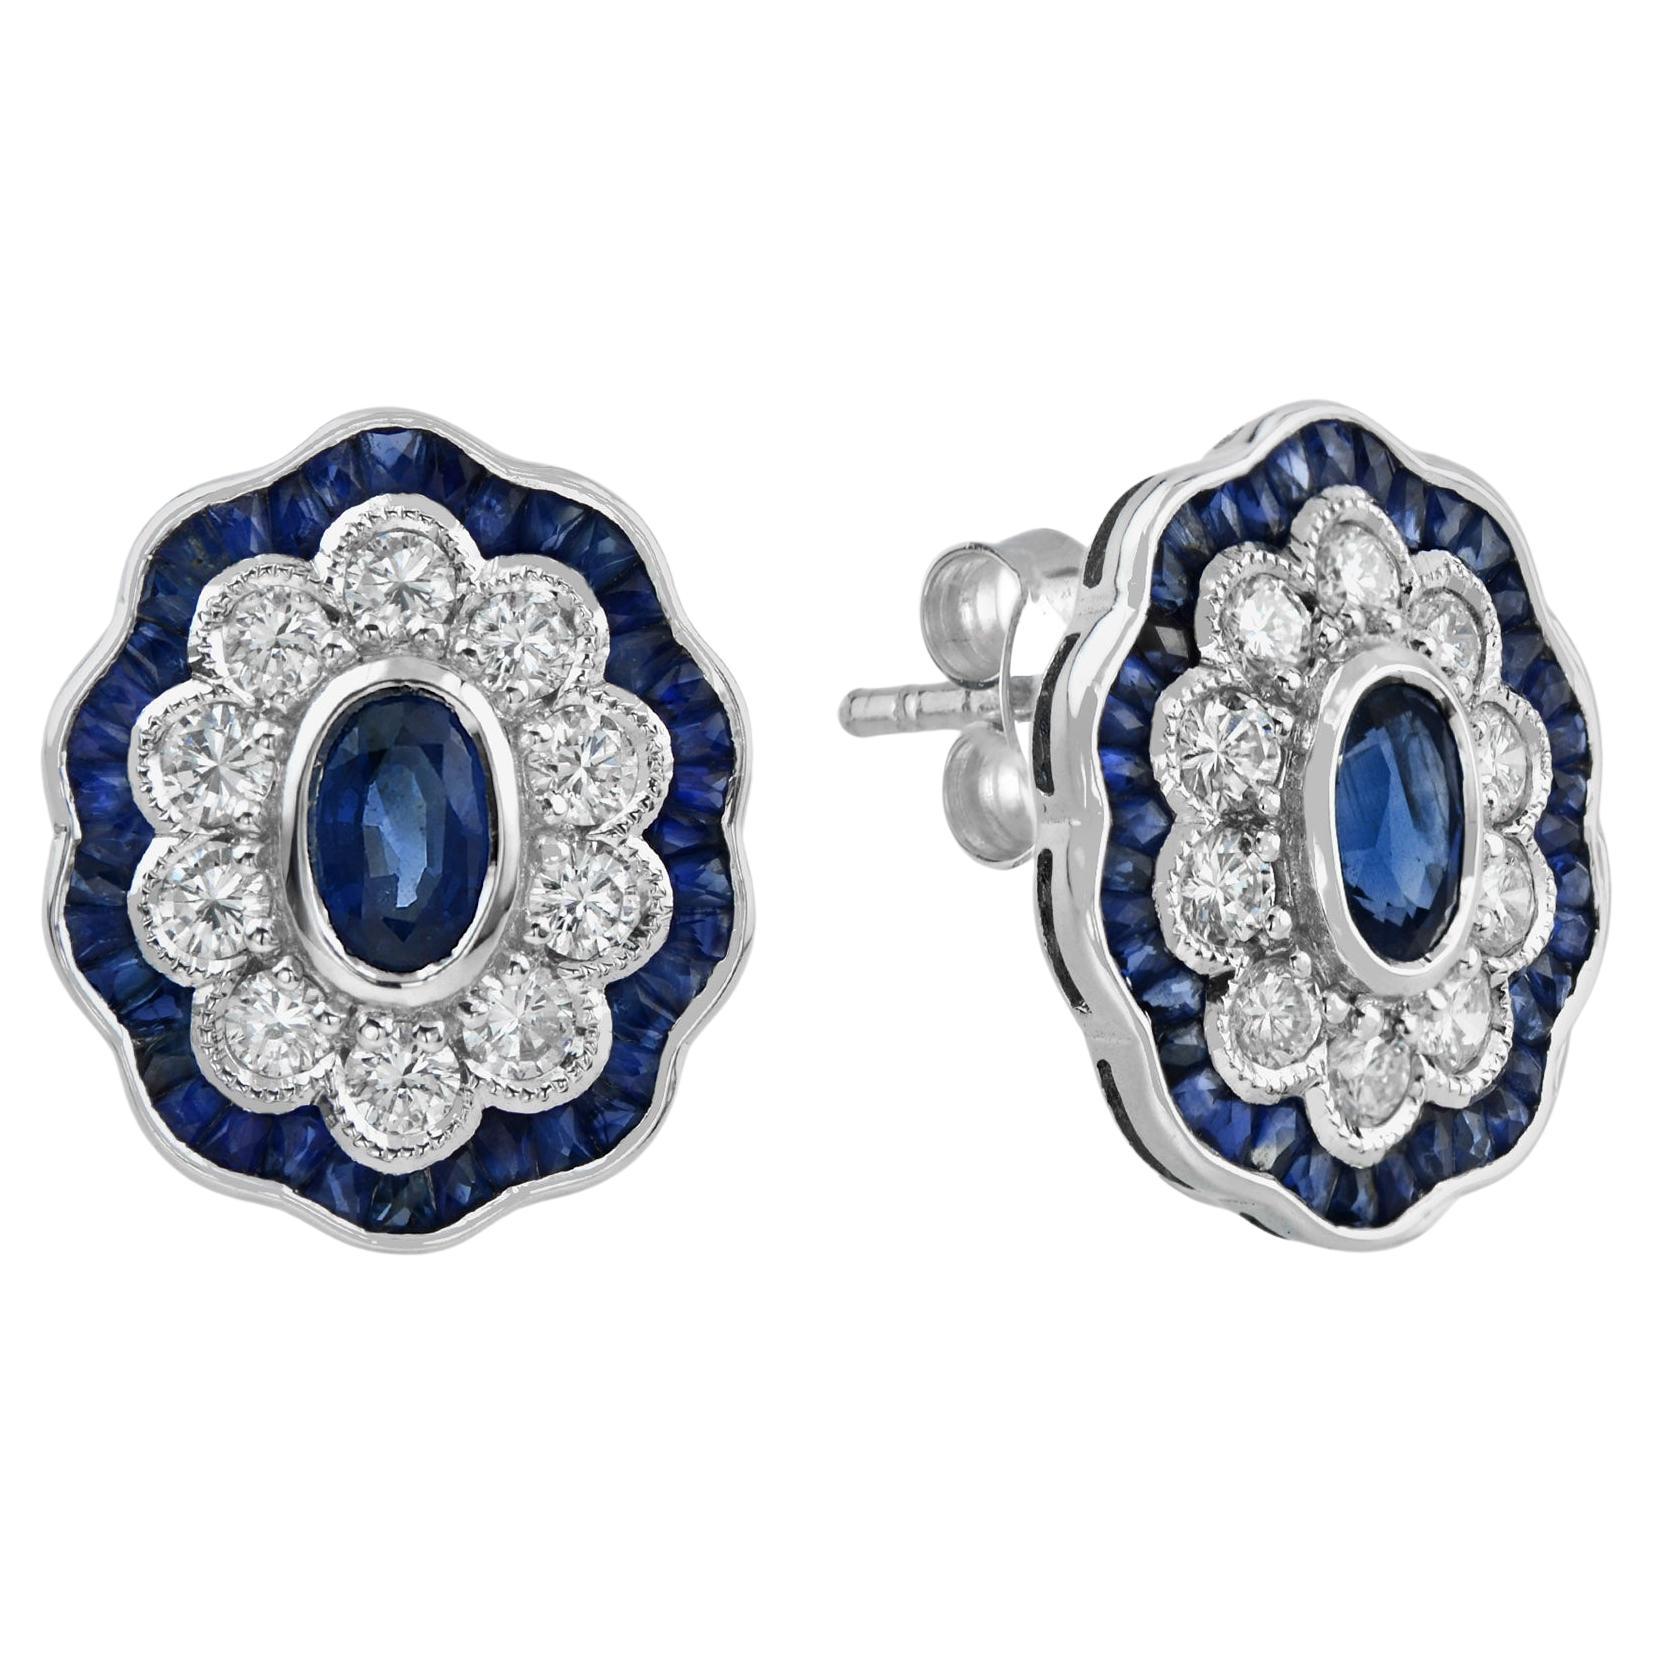 Sapphire and Diamond Art Deco Style Oval Floral Stud Earrings in 18k White Gold